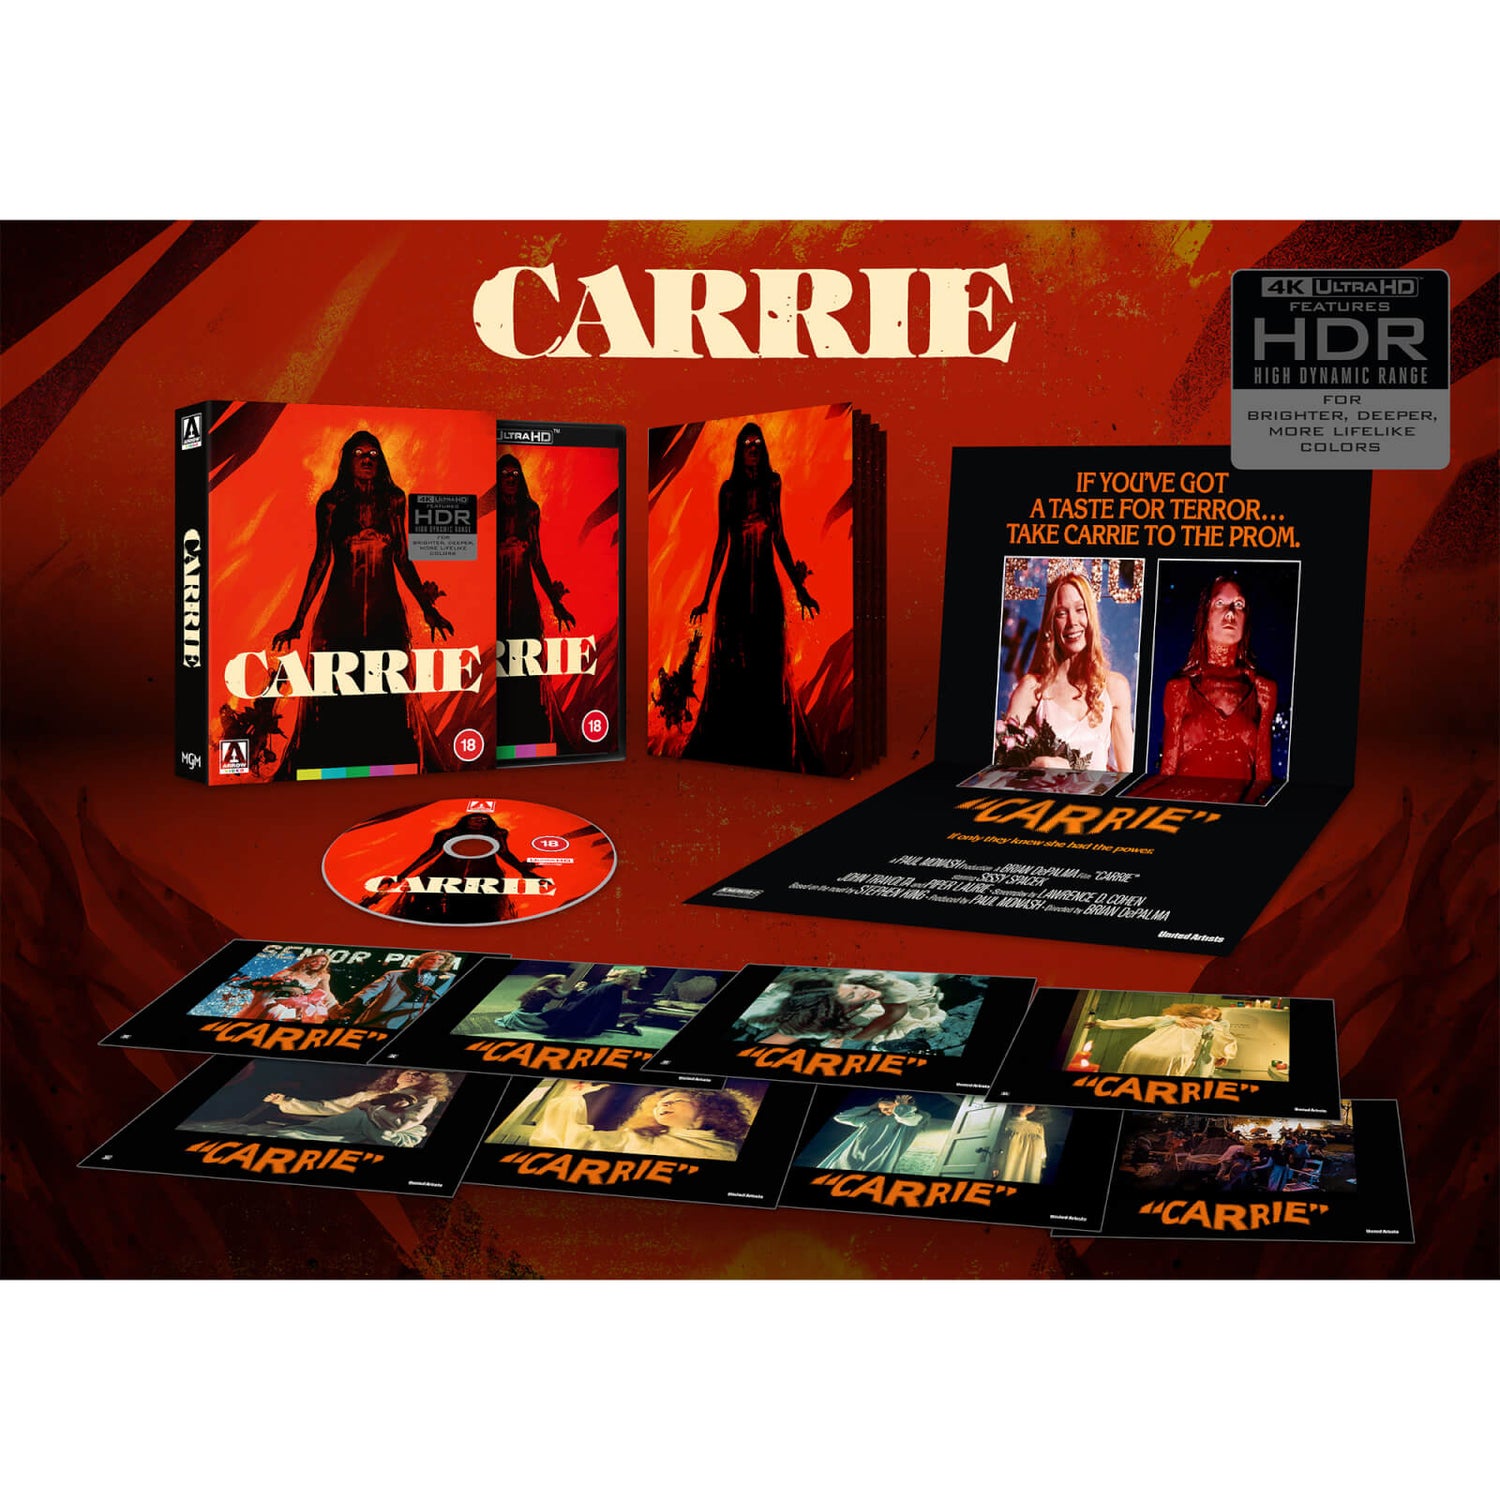 Carrie Limited Edition 4K UHD